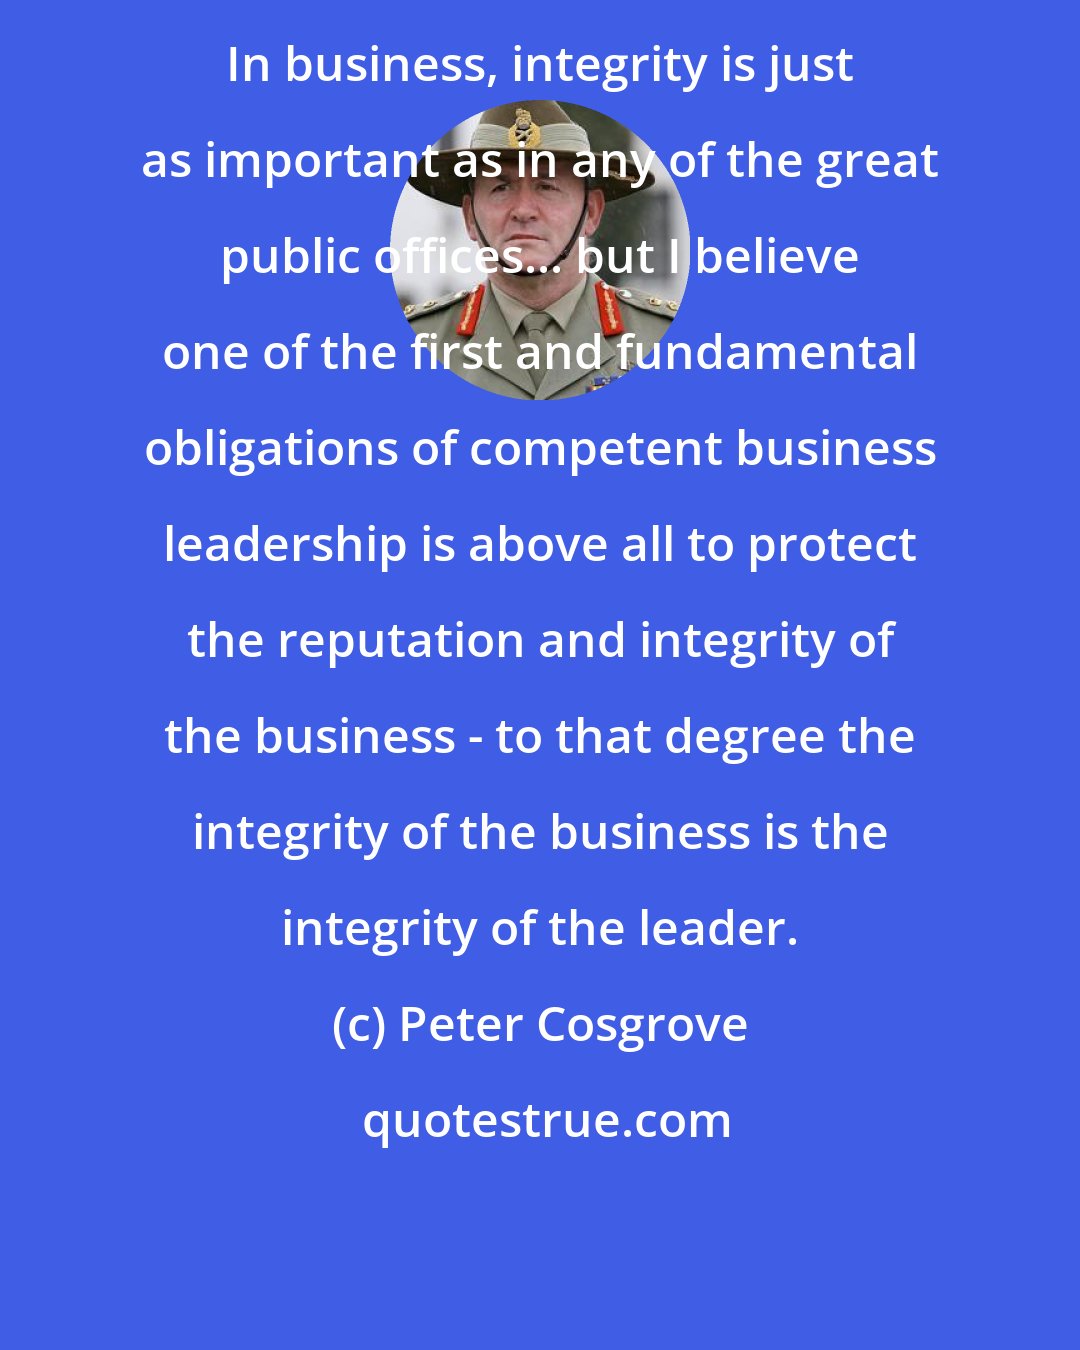 Peter Cosgrove: In business, integrity is just as important as in any of the great public offices... but I believe one of the first and fundamental obligations of competent business leadership is above all to protect the reputation and integrity of the business - to that degree the integrity of the business is the integrity of the leader.